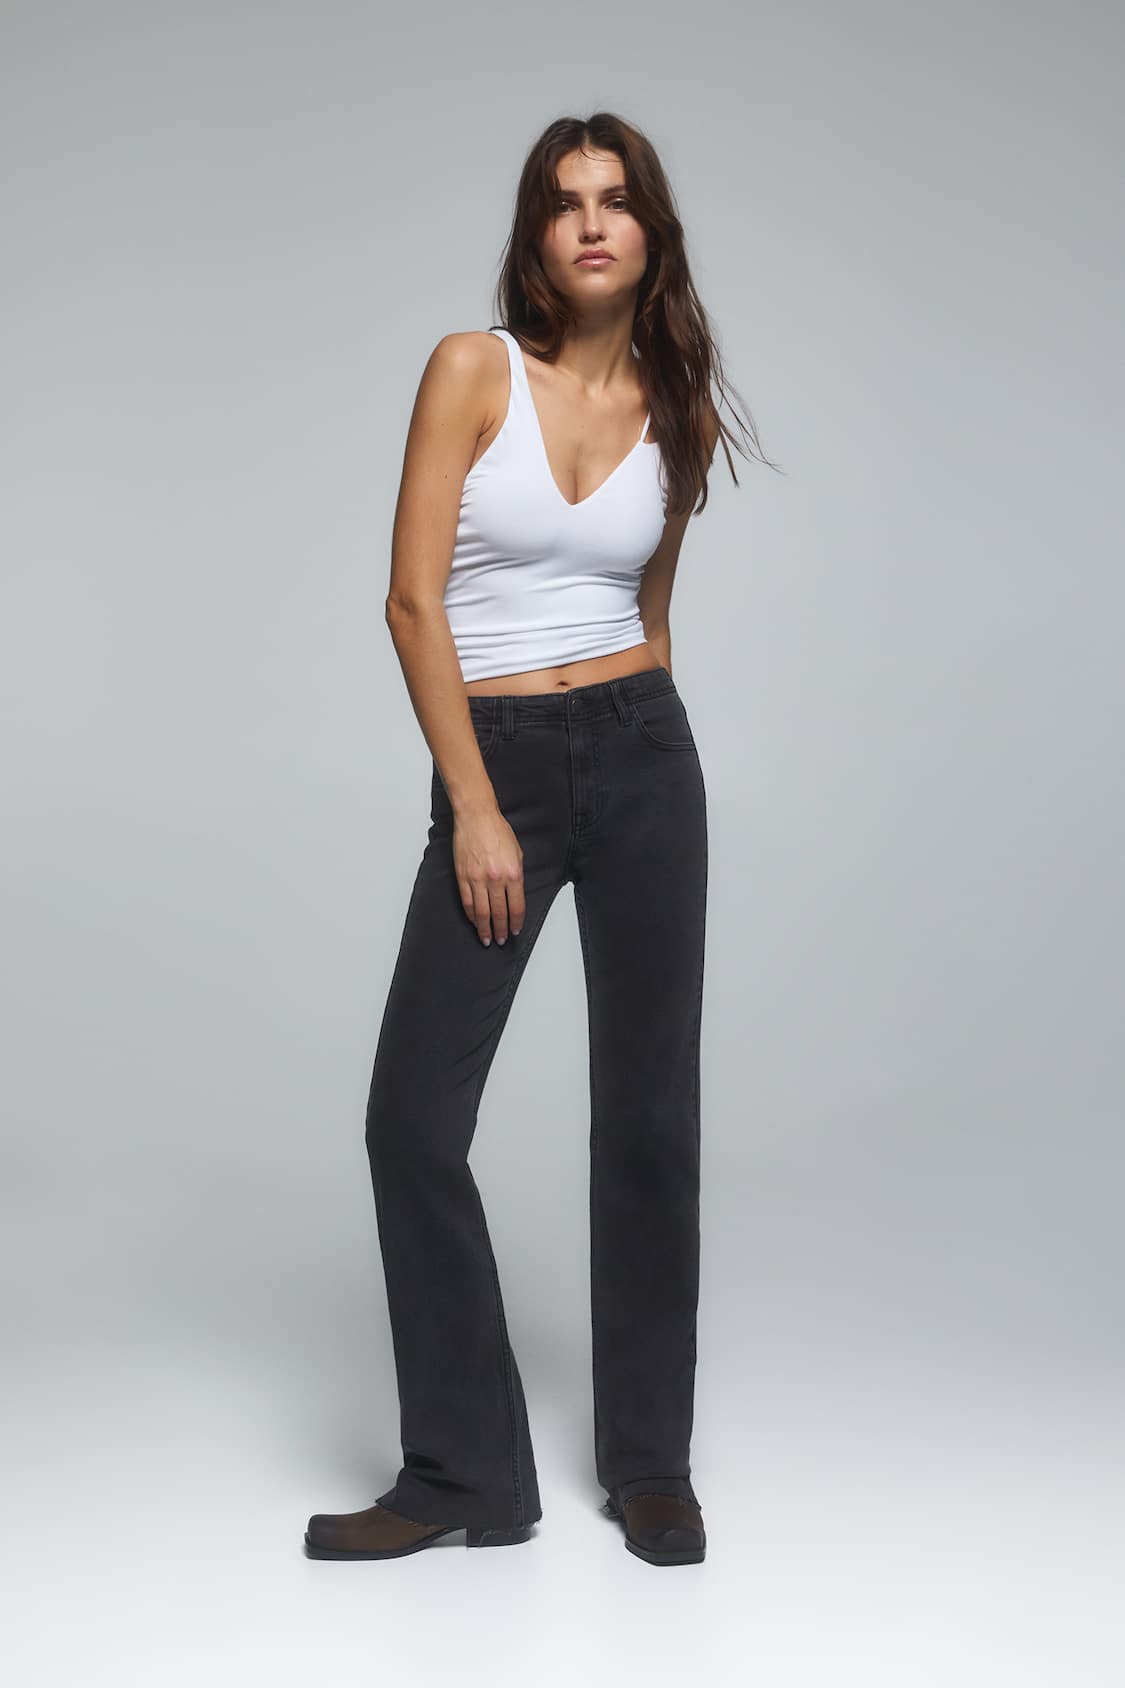 Pull&Bear skirt detail flare pants in charcoal gray